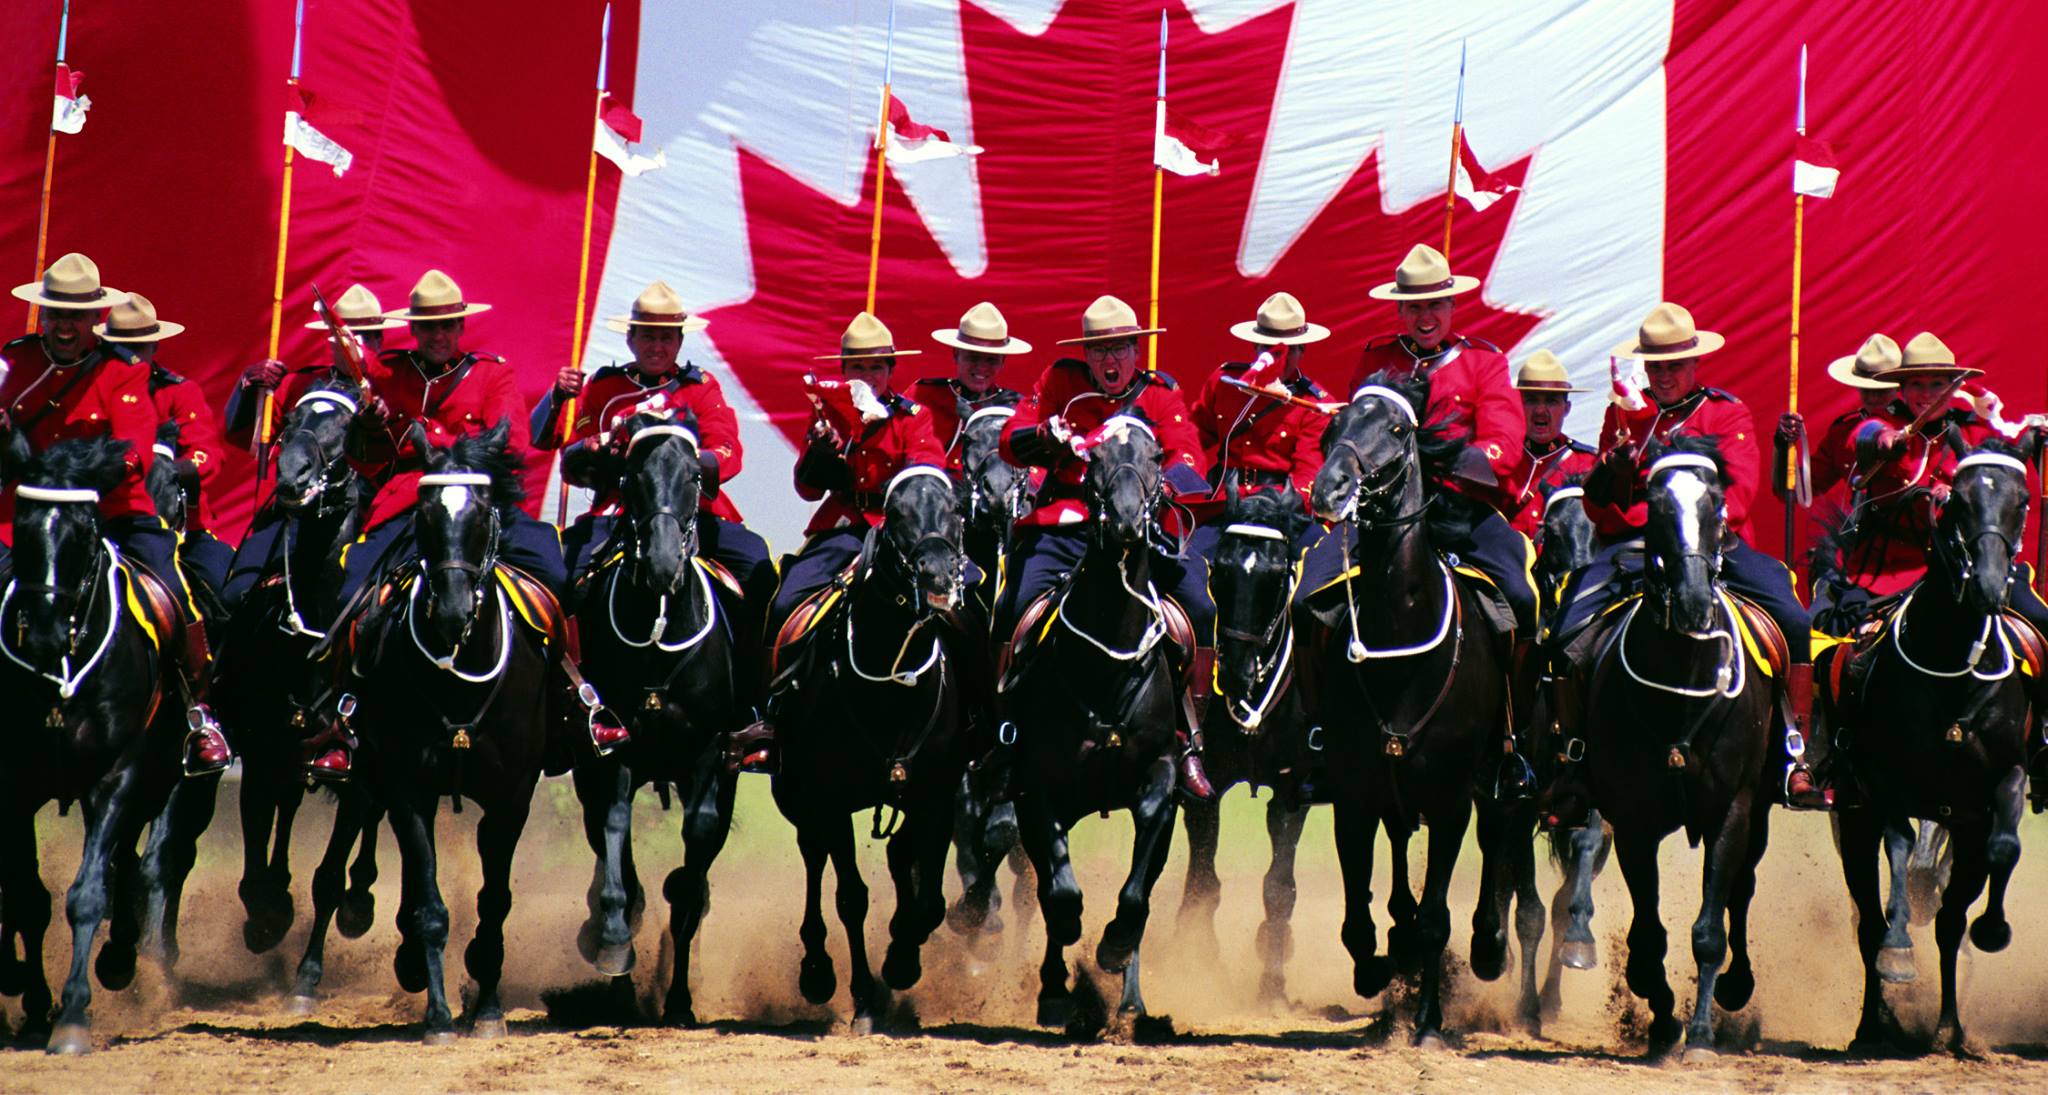 Canadian Mounties At Royal Windsor Horse Show (1960s)